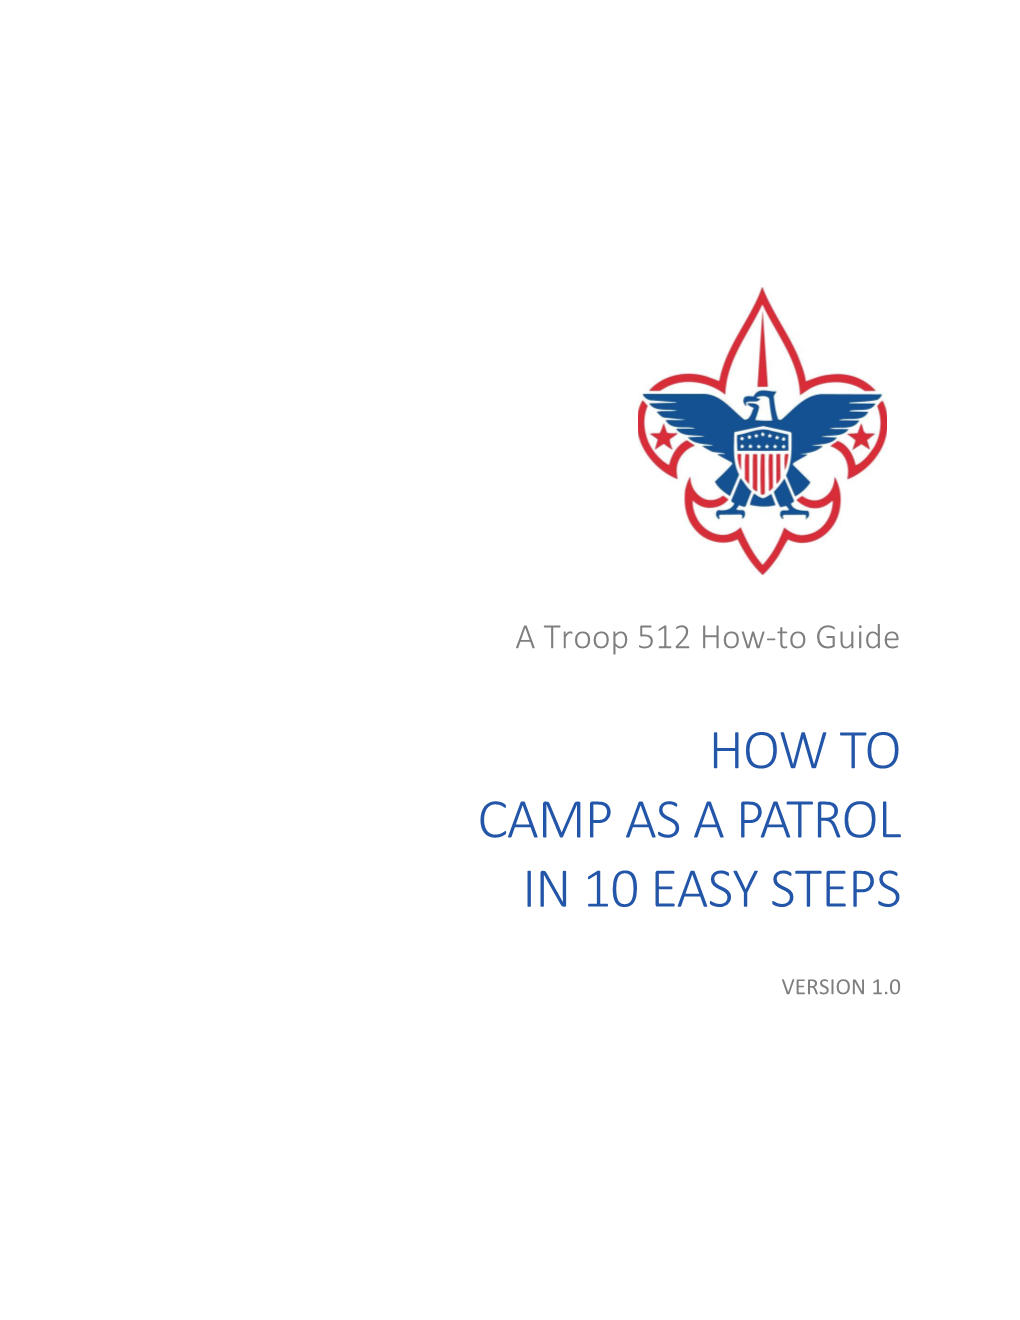 How to Camp As a Patrol in 10 Easy Steps